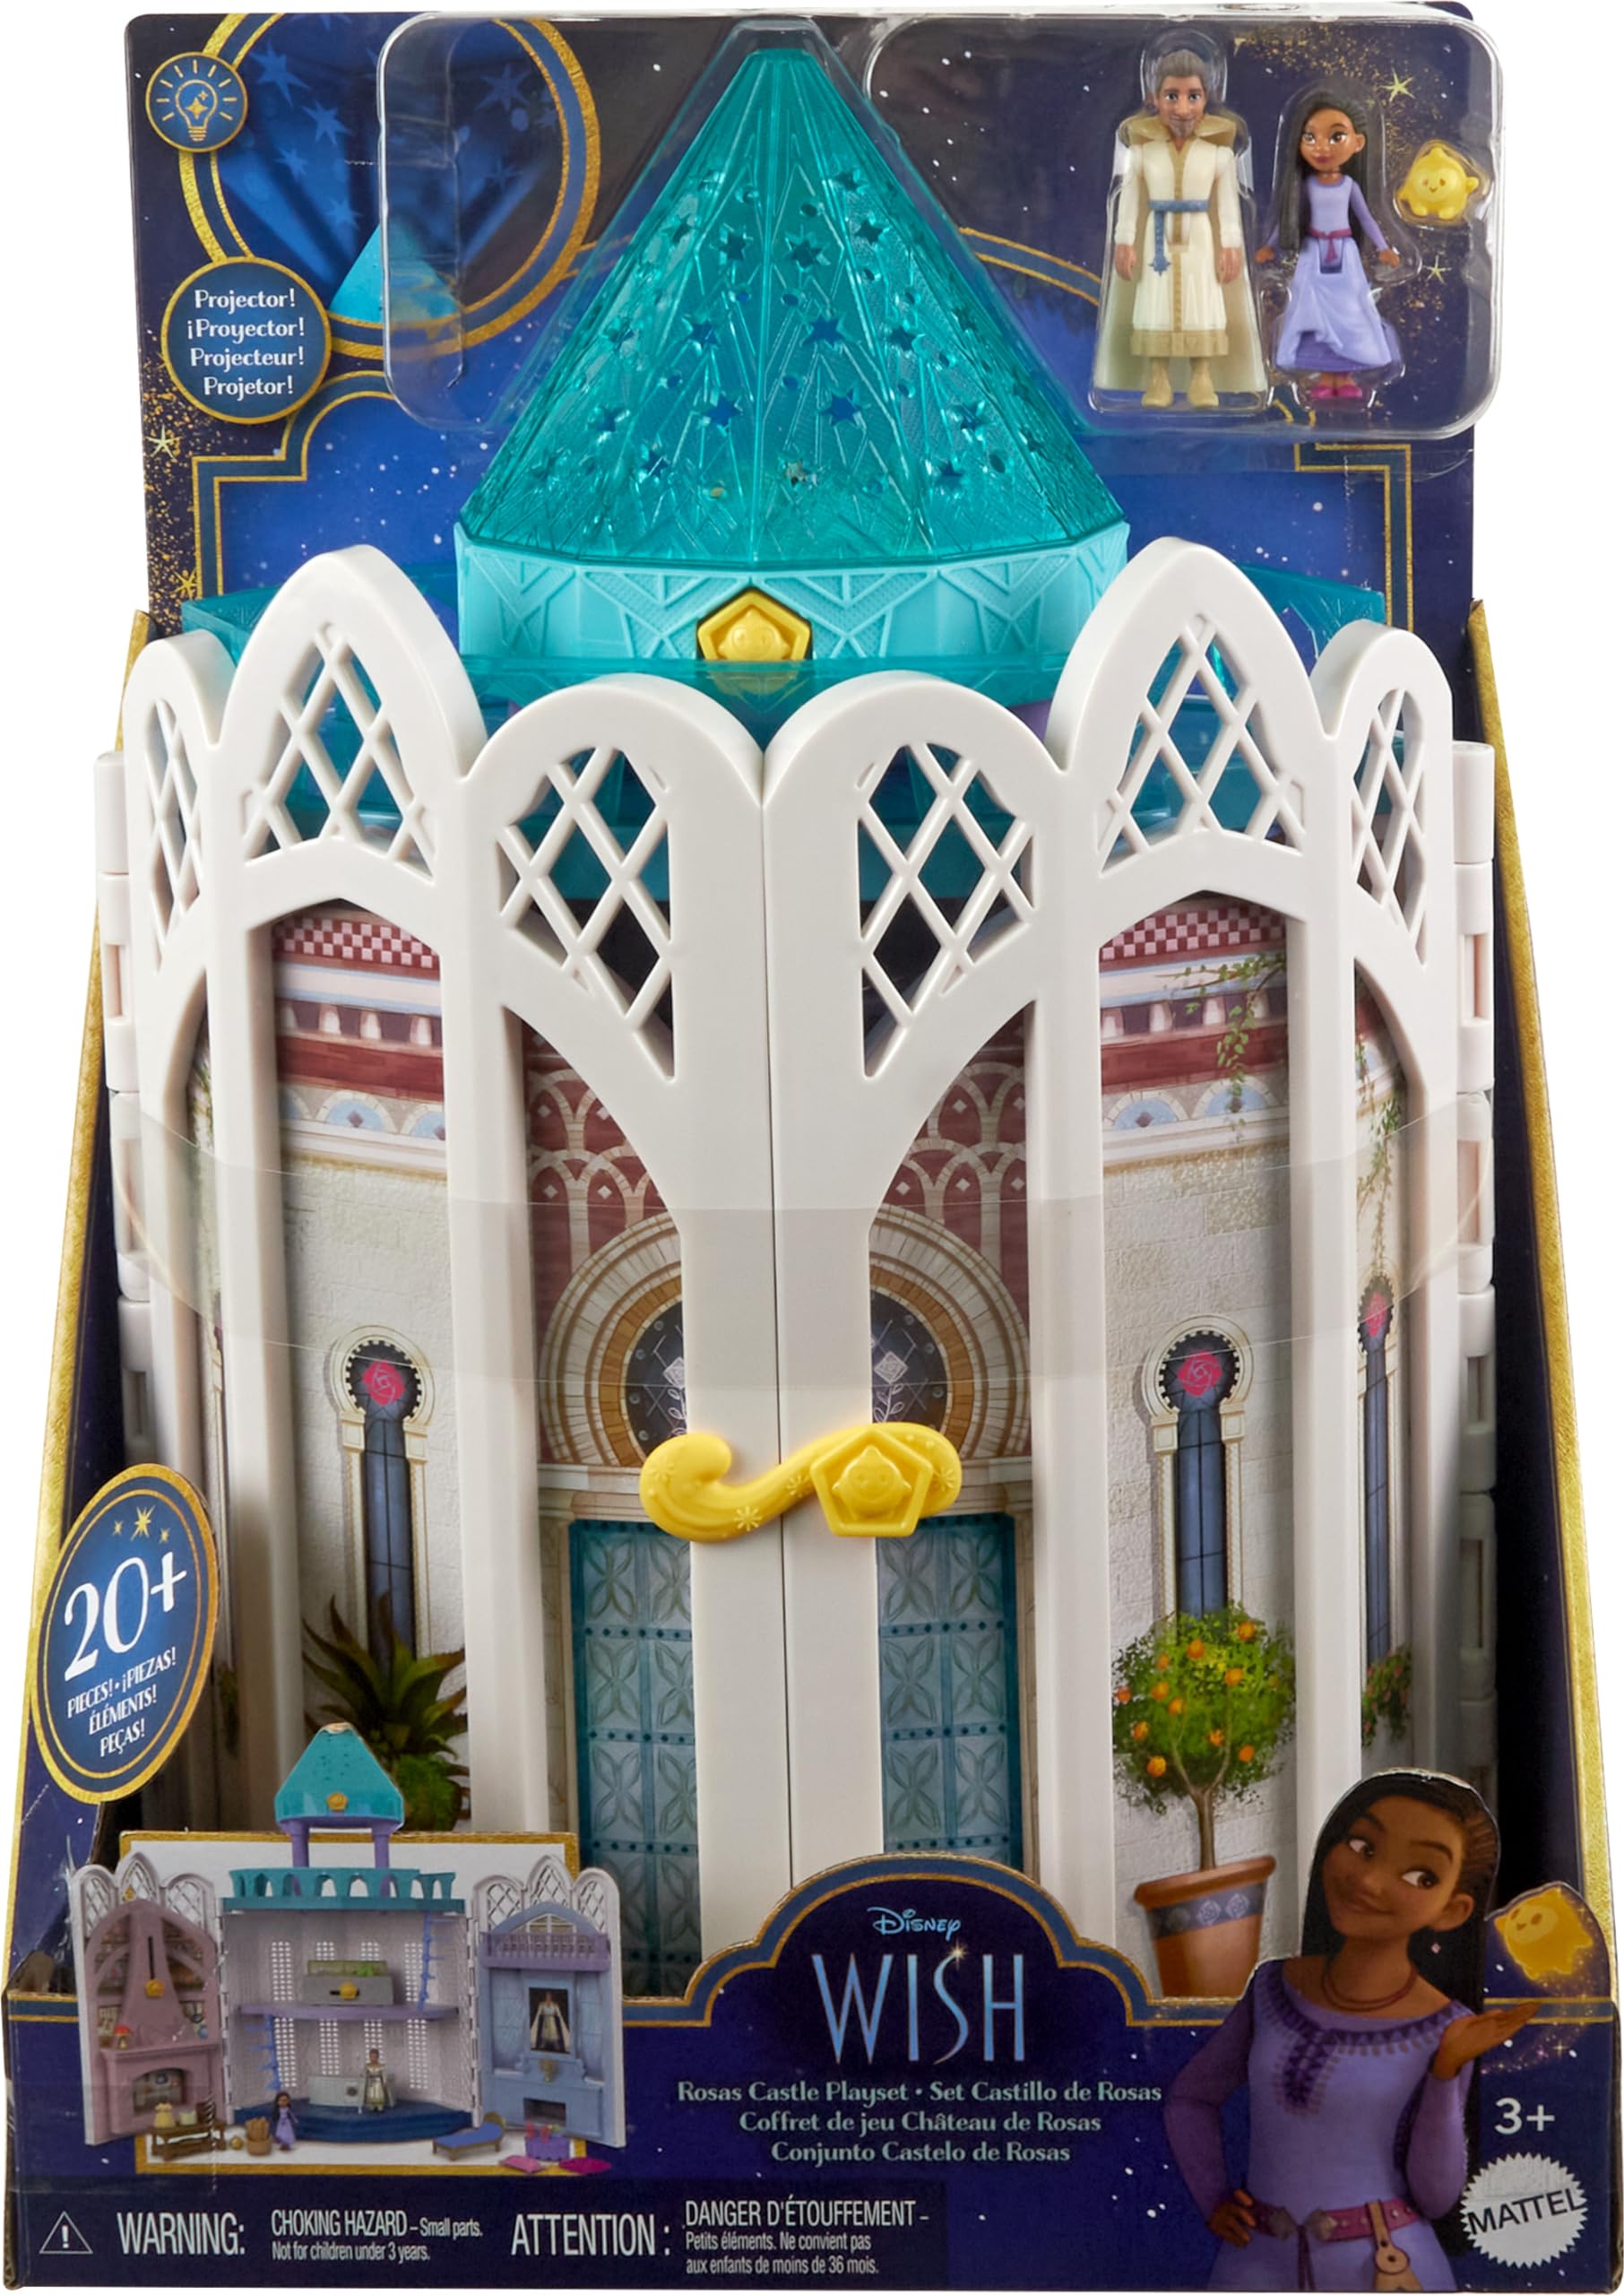 Mattel Disney's Wish Rosas Castle Dollhouse Playset with 2 Posable Mini Dolls, Star Figure, 20 Accessories, Light-Up Projection Dome & More